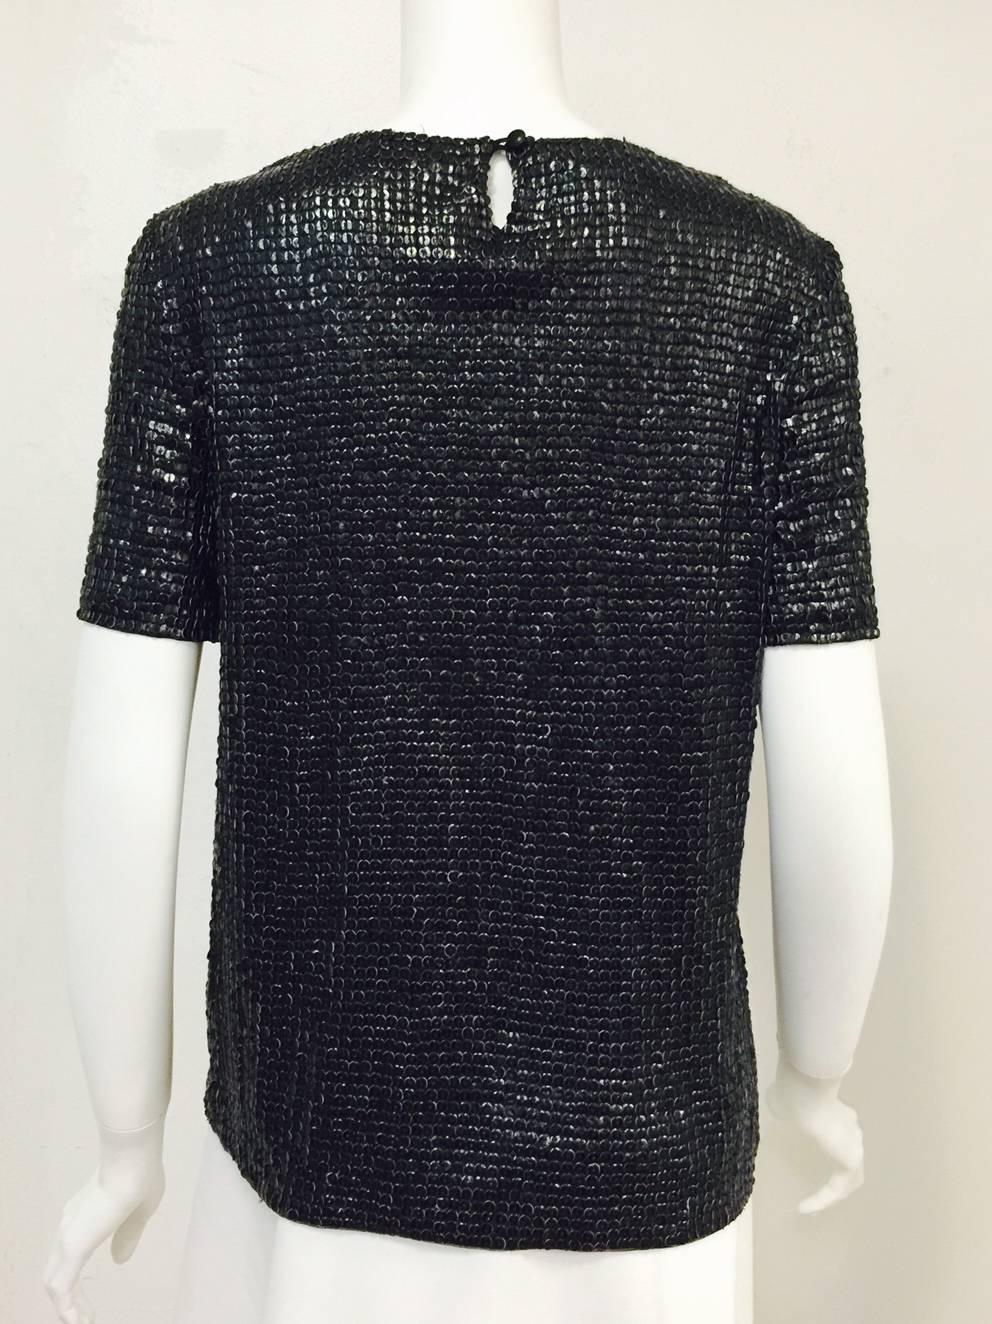 Black Loewe Nappa Leather Sequin Embroidered Short Sleeve Top 